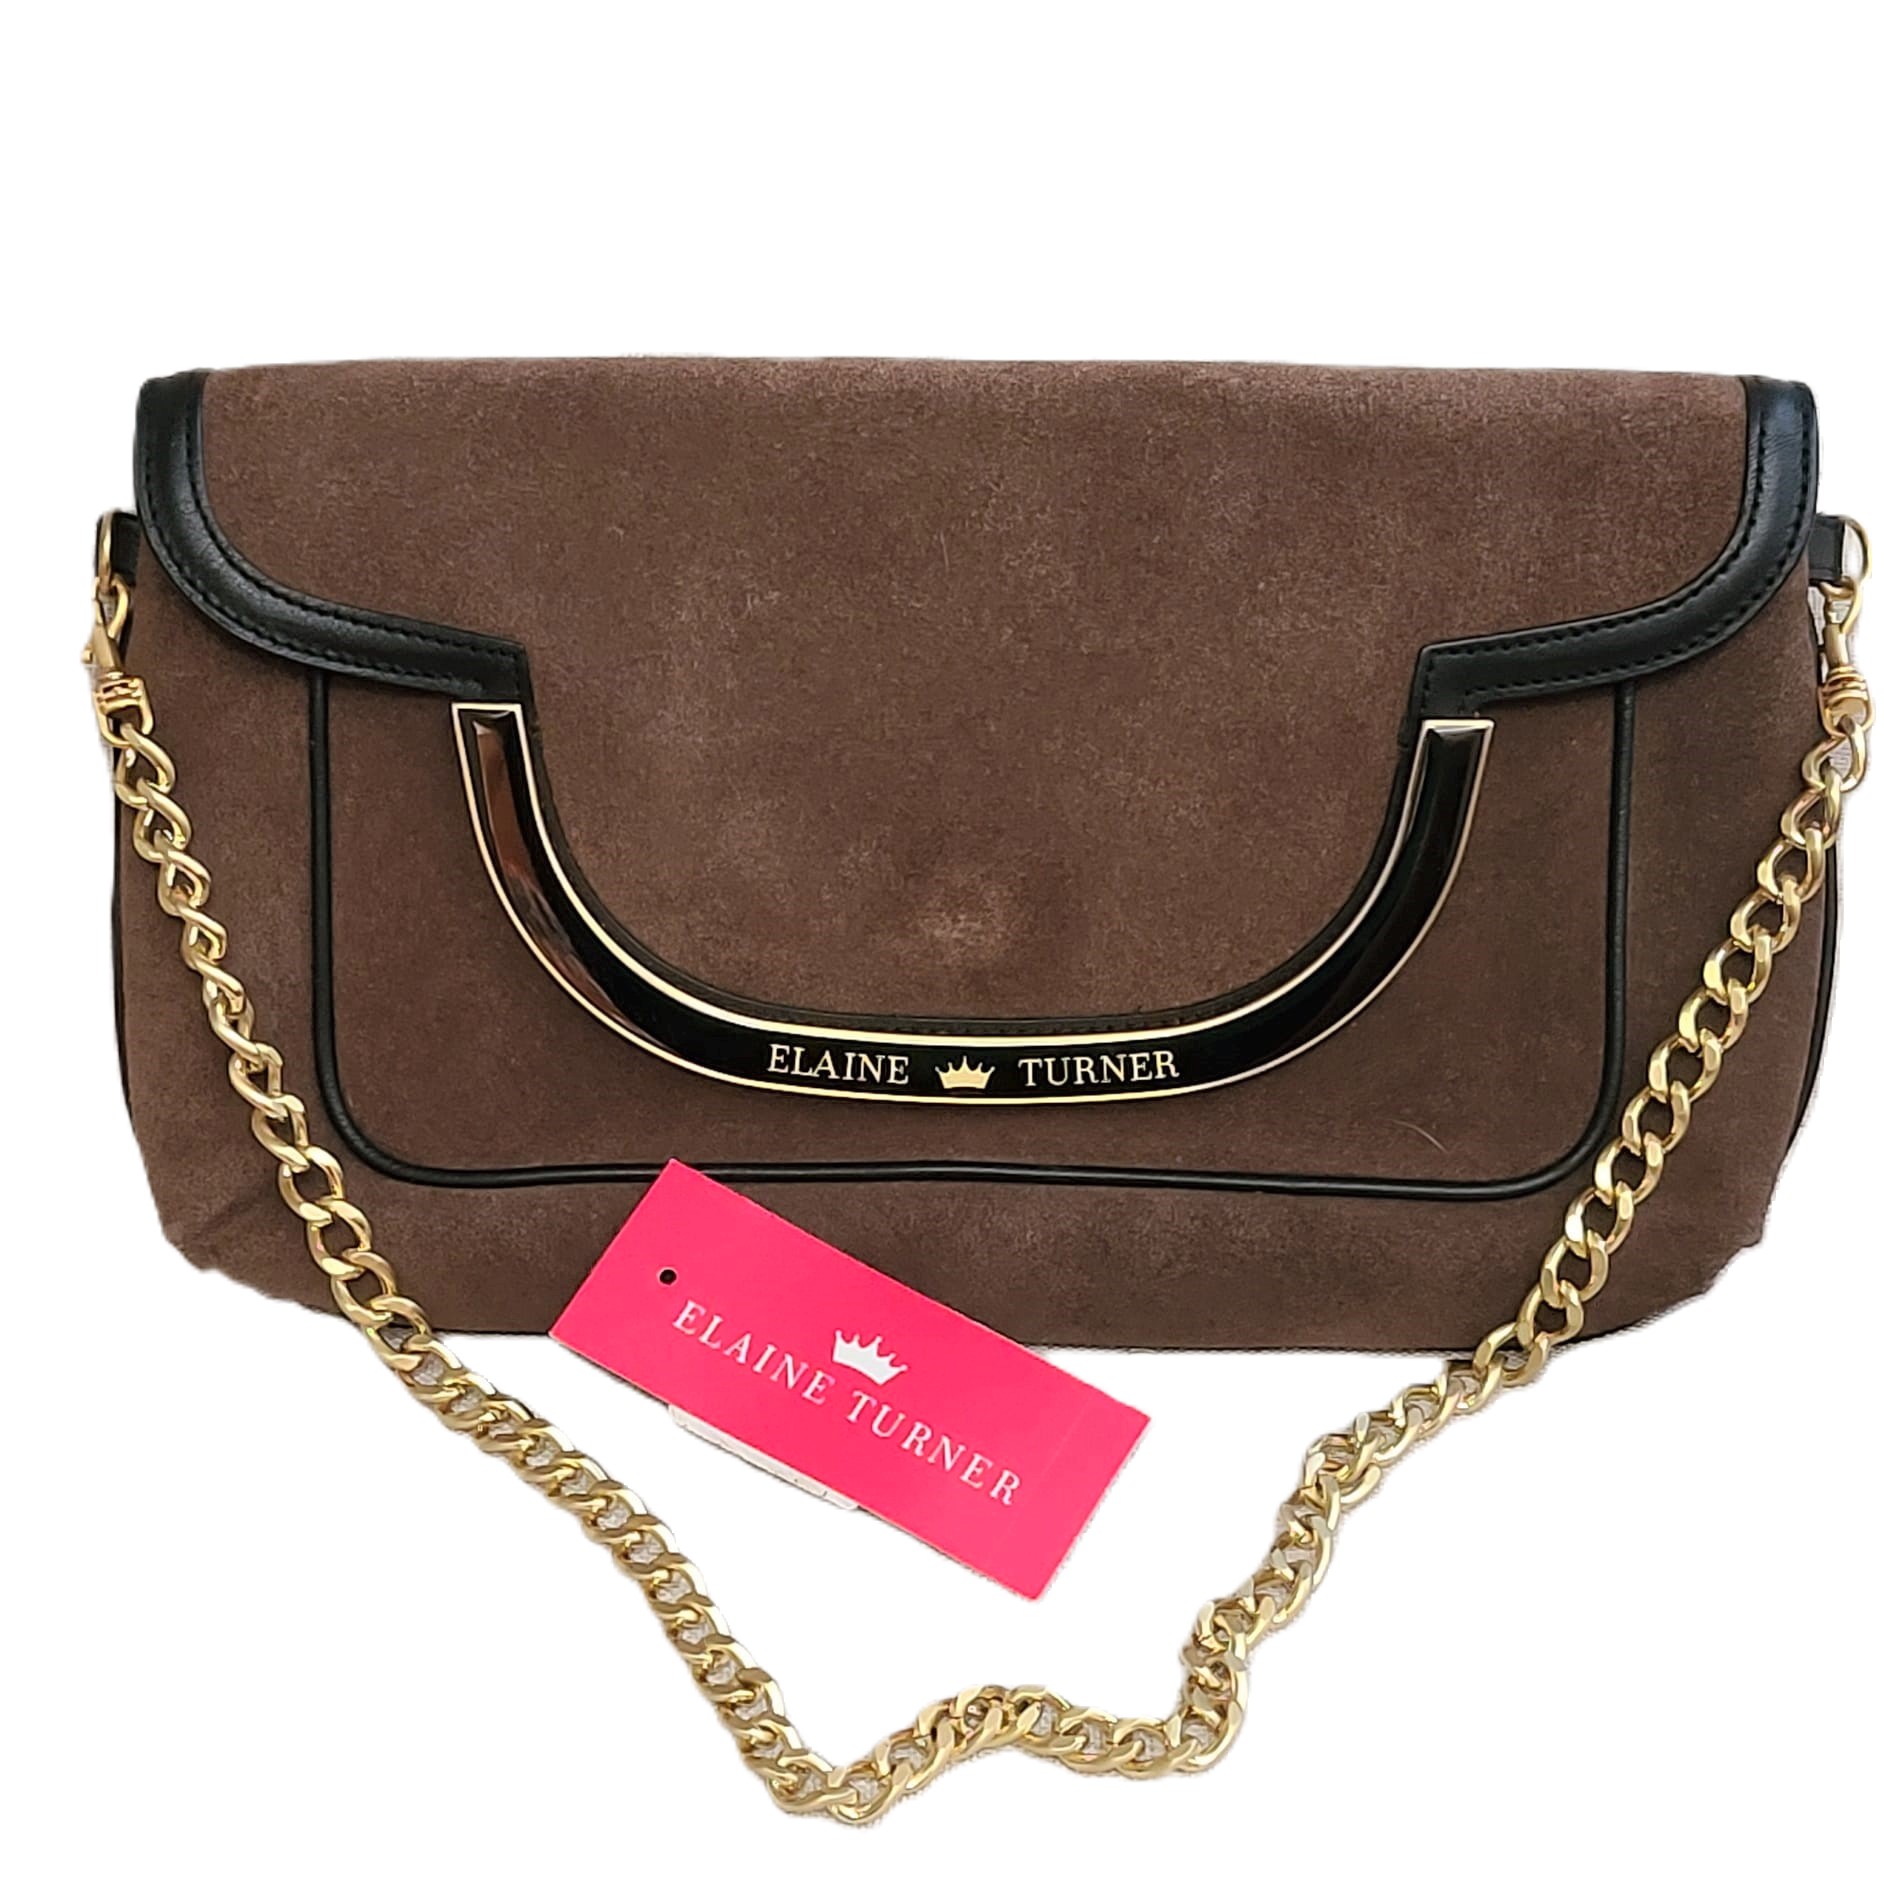 Elaine Turner brown suede handbag with gold chain strap - Click Image to Close